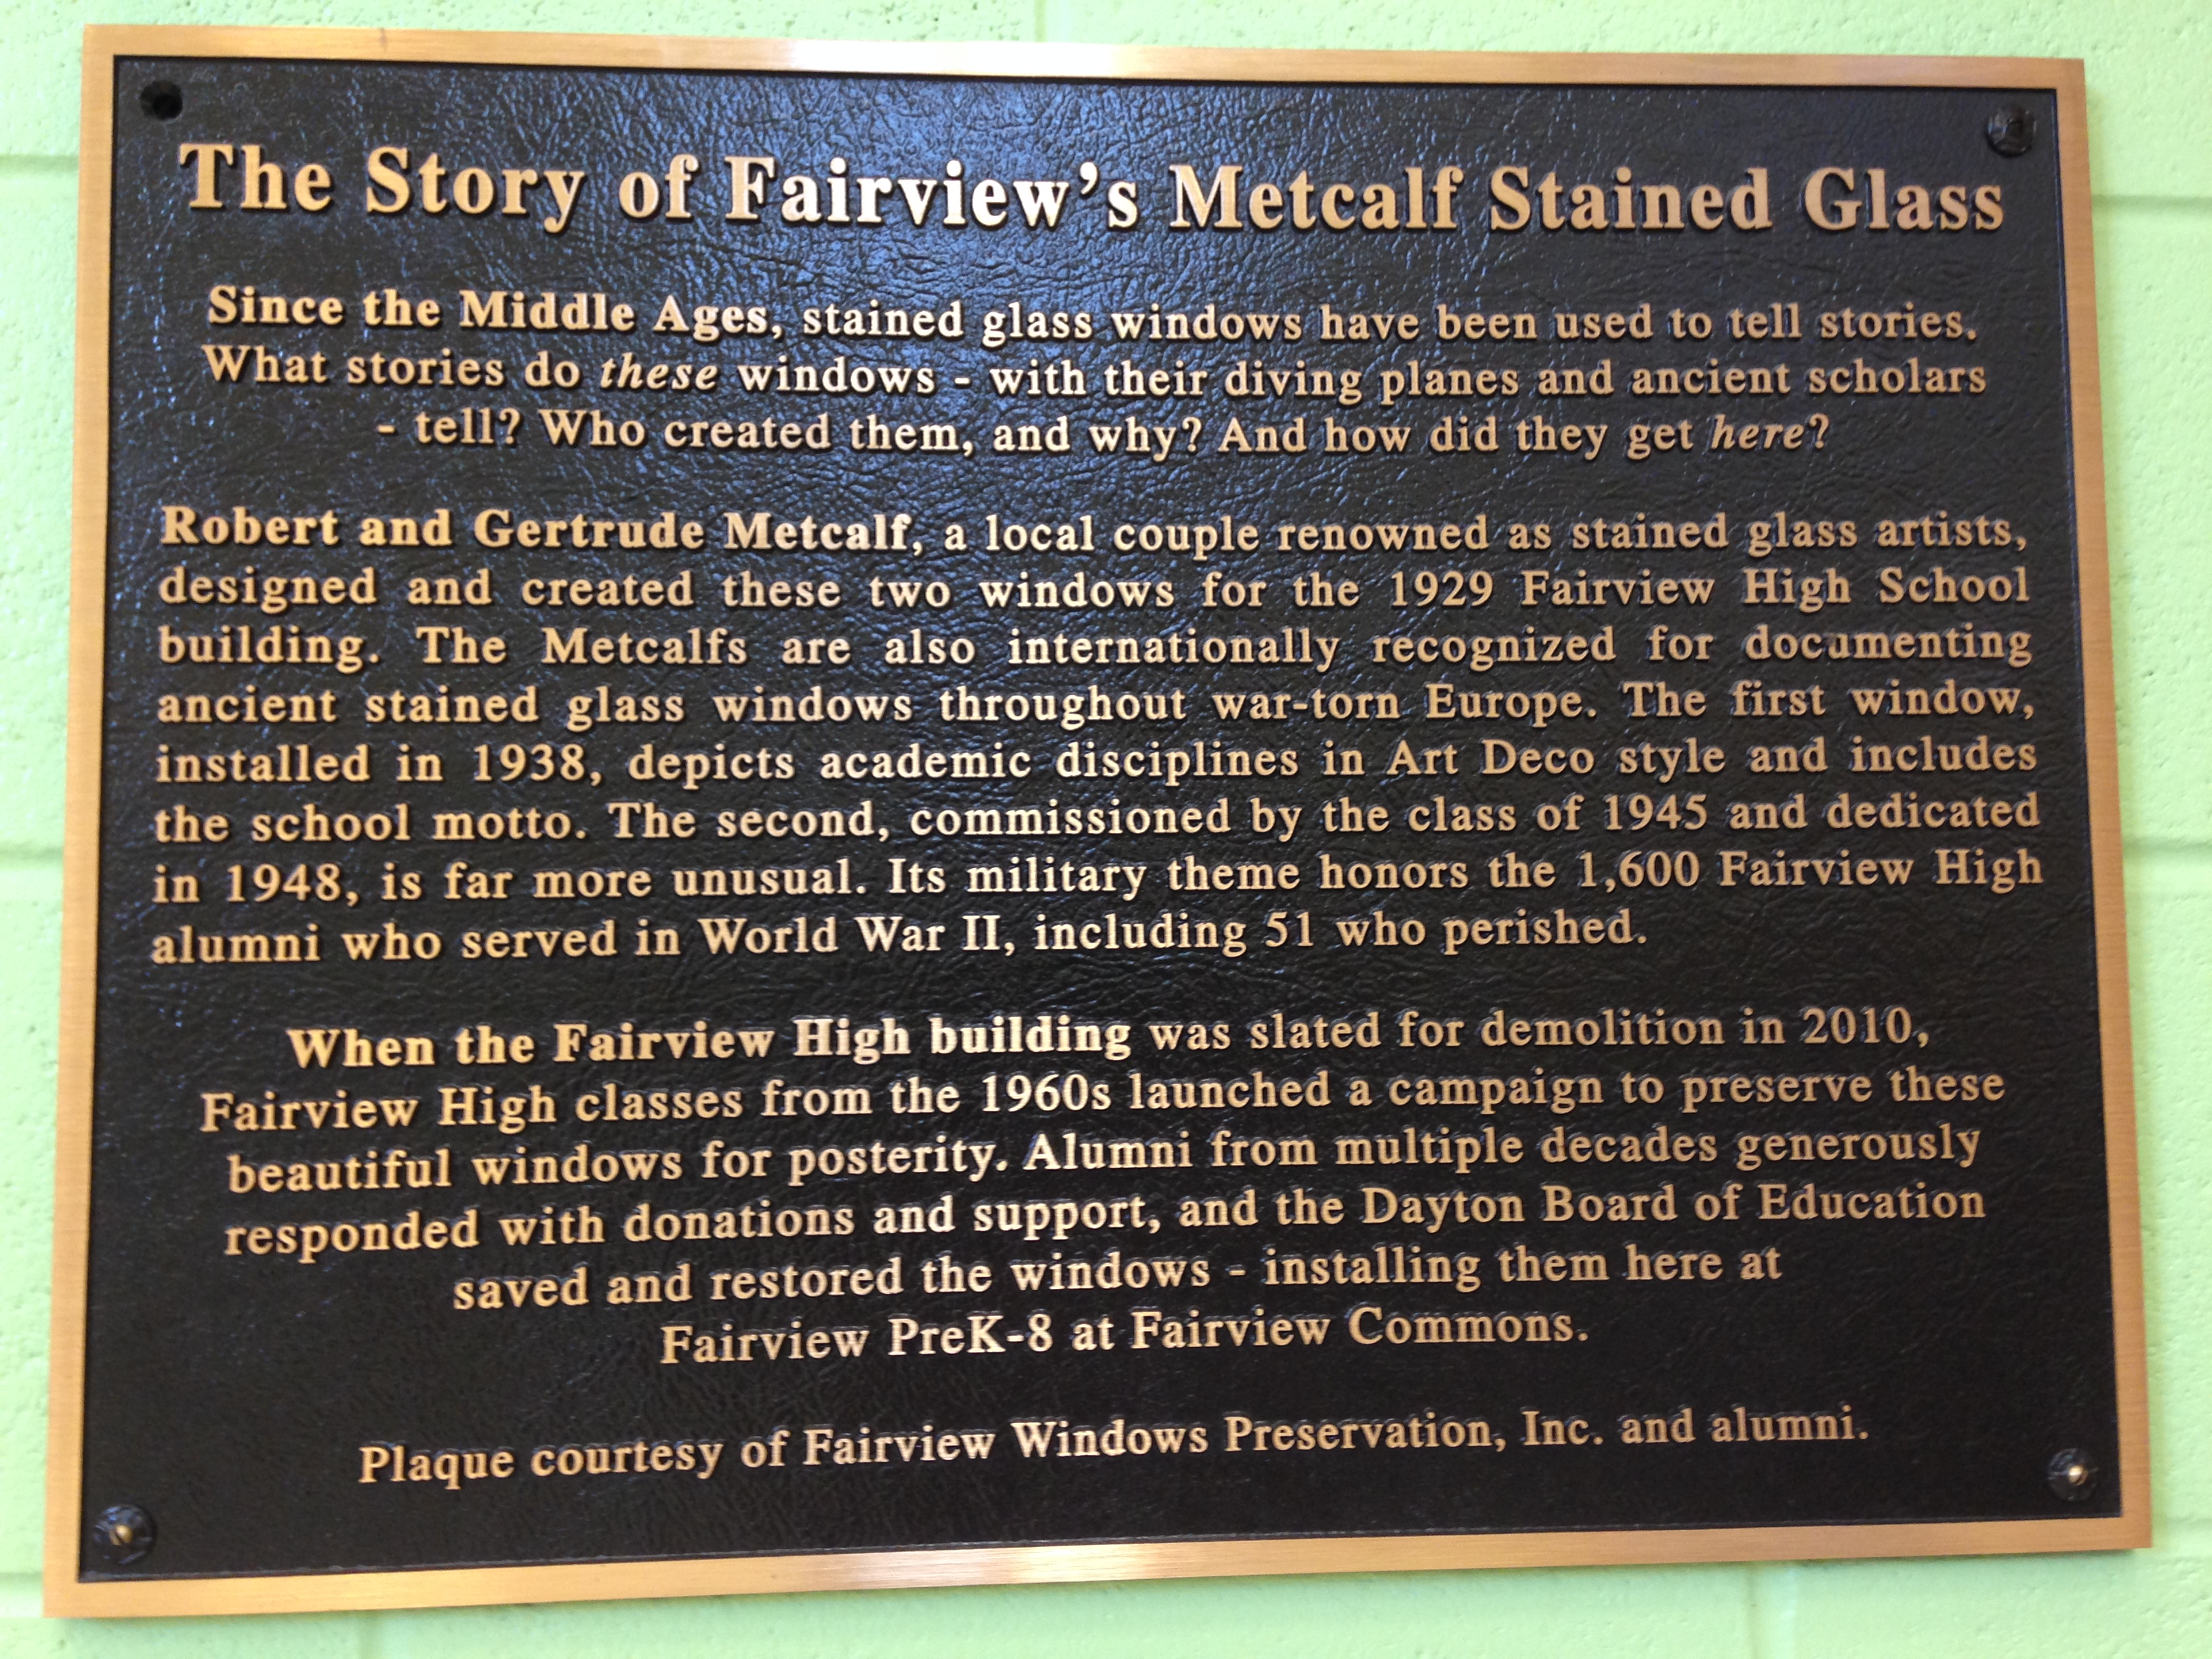 Bronze plaque purchased to be displayed with the Metcalf stained glass in the new Fairview PreK-8 School and accompany the stained glass into the future. The plaque was made possible from donations made by Fairview High School Alumni to Fairview Windows P